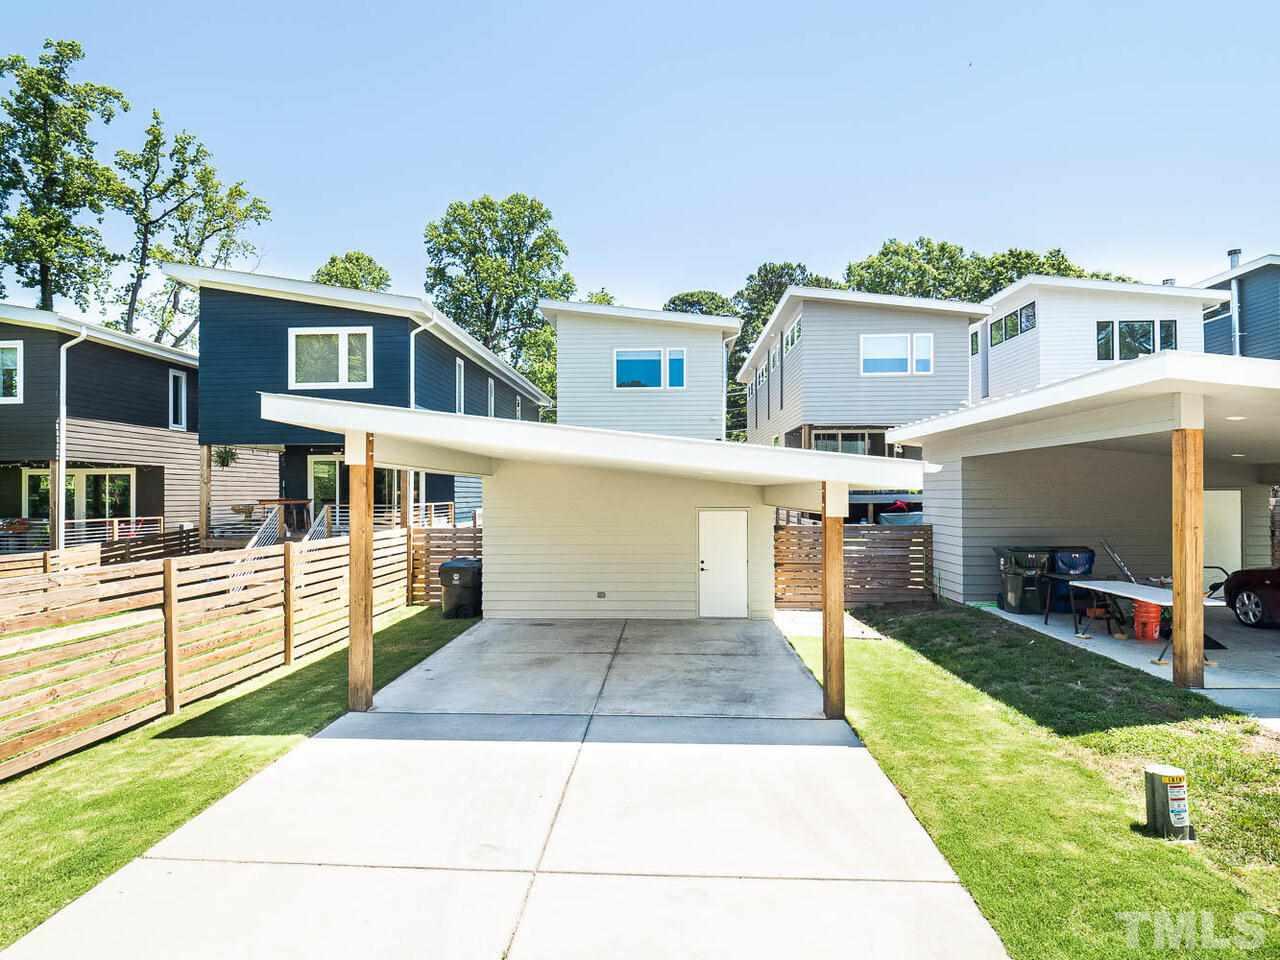 Modernist Home of the Month: 230 Powell Drive 